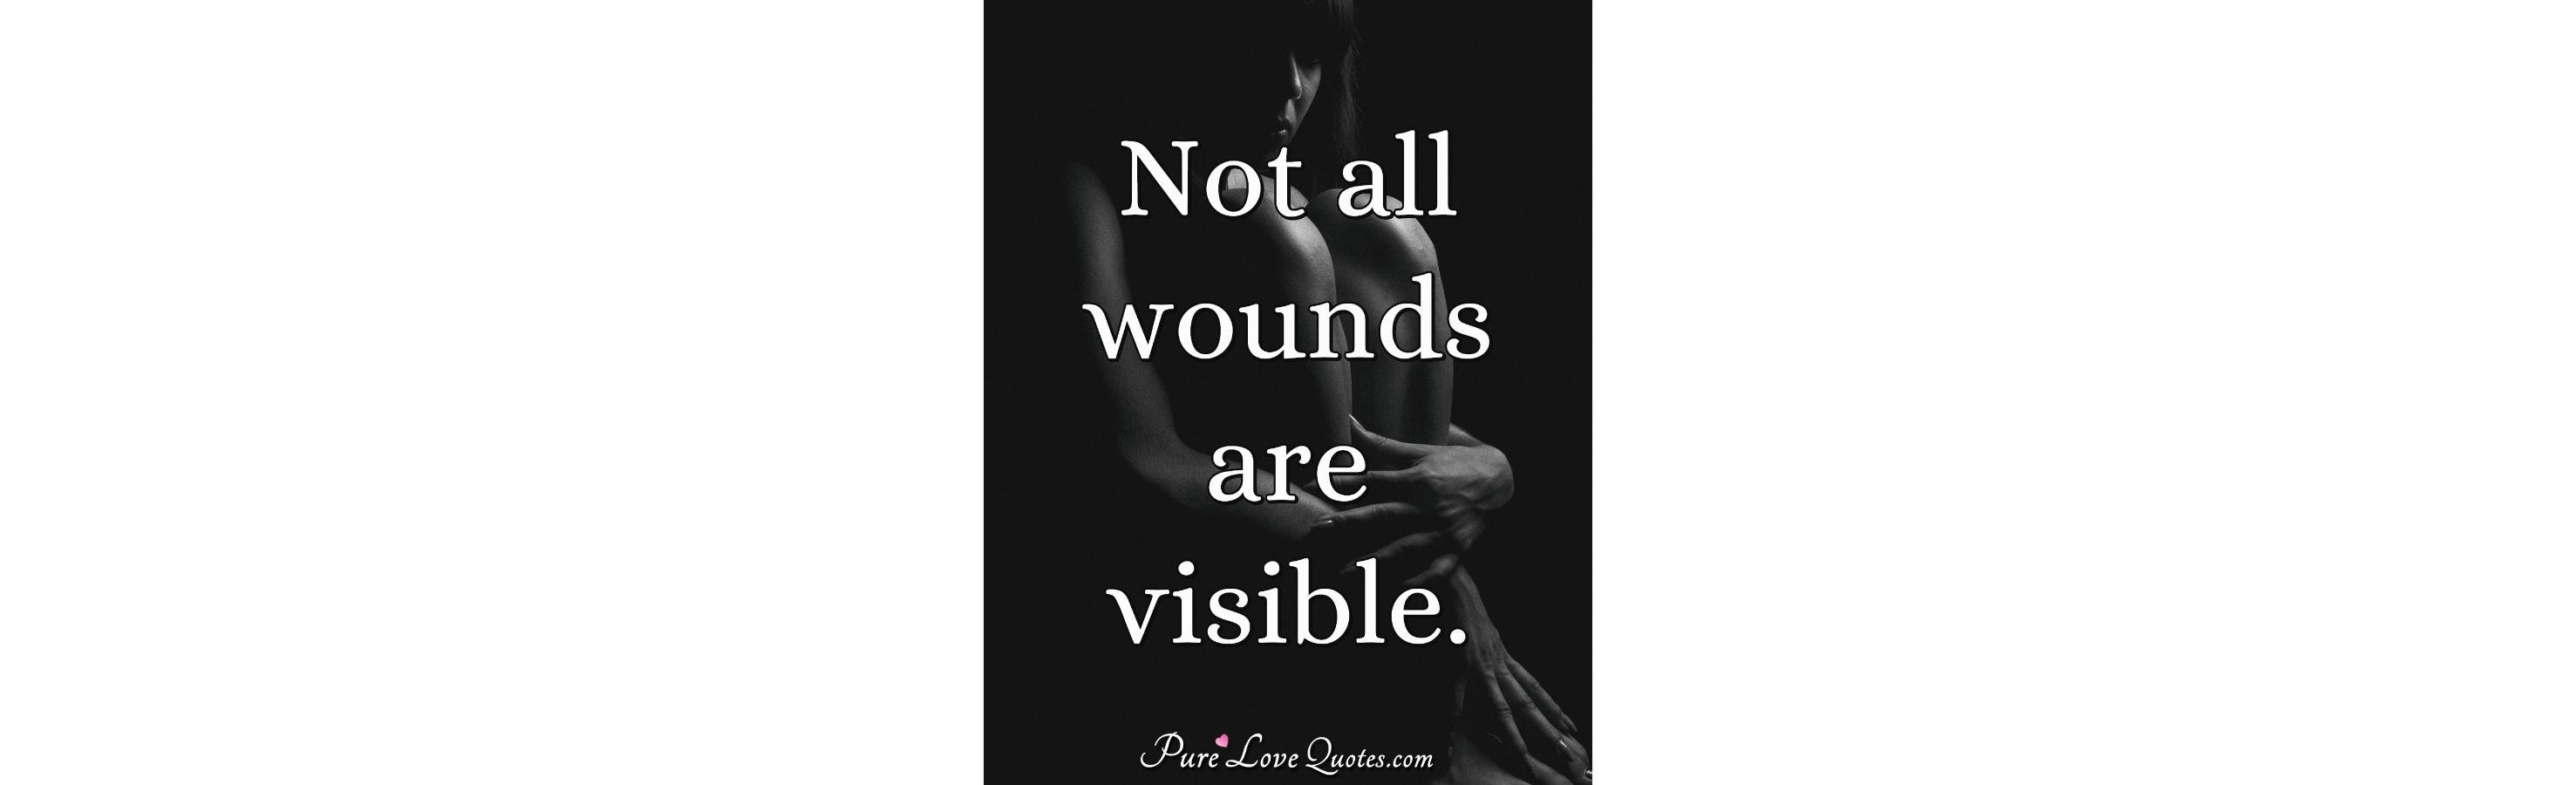 Not all wounds are visible.  PureLoveQuotes